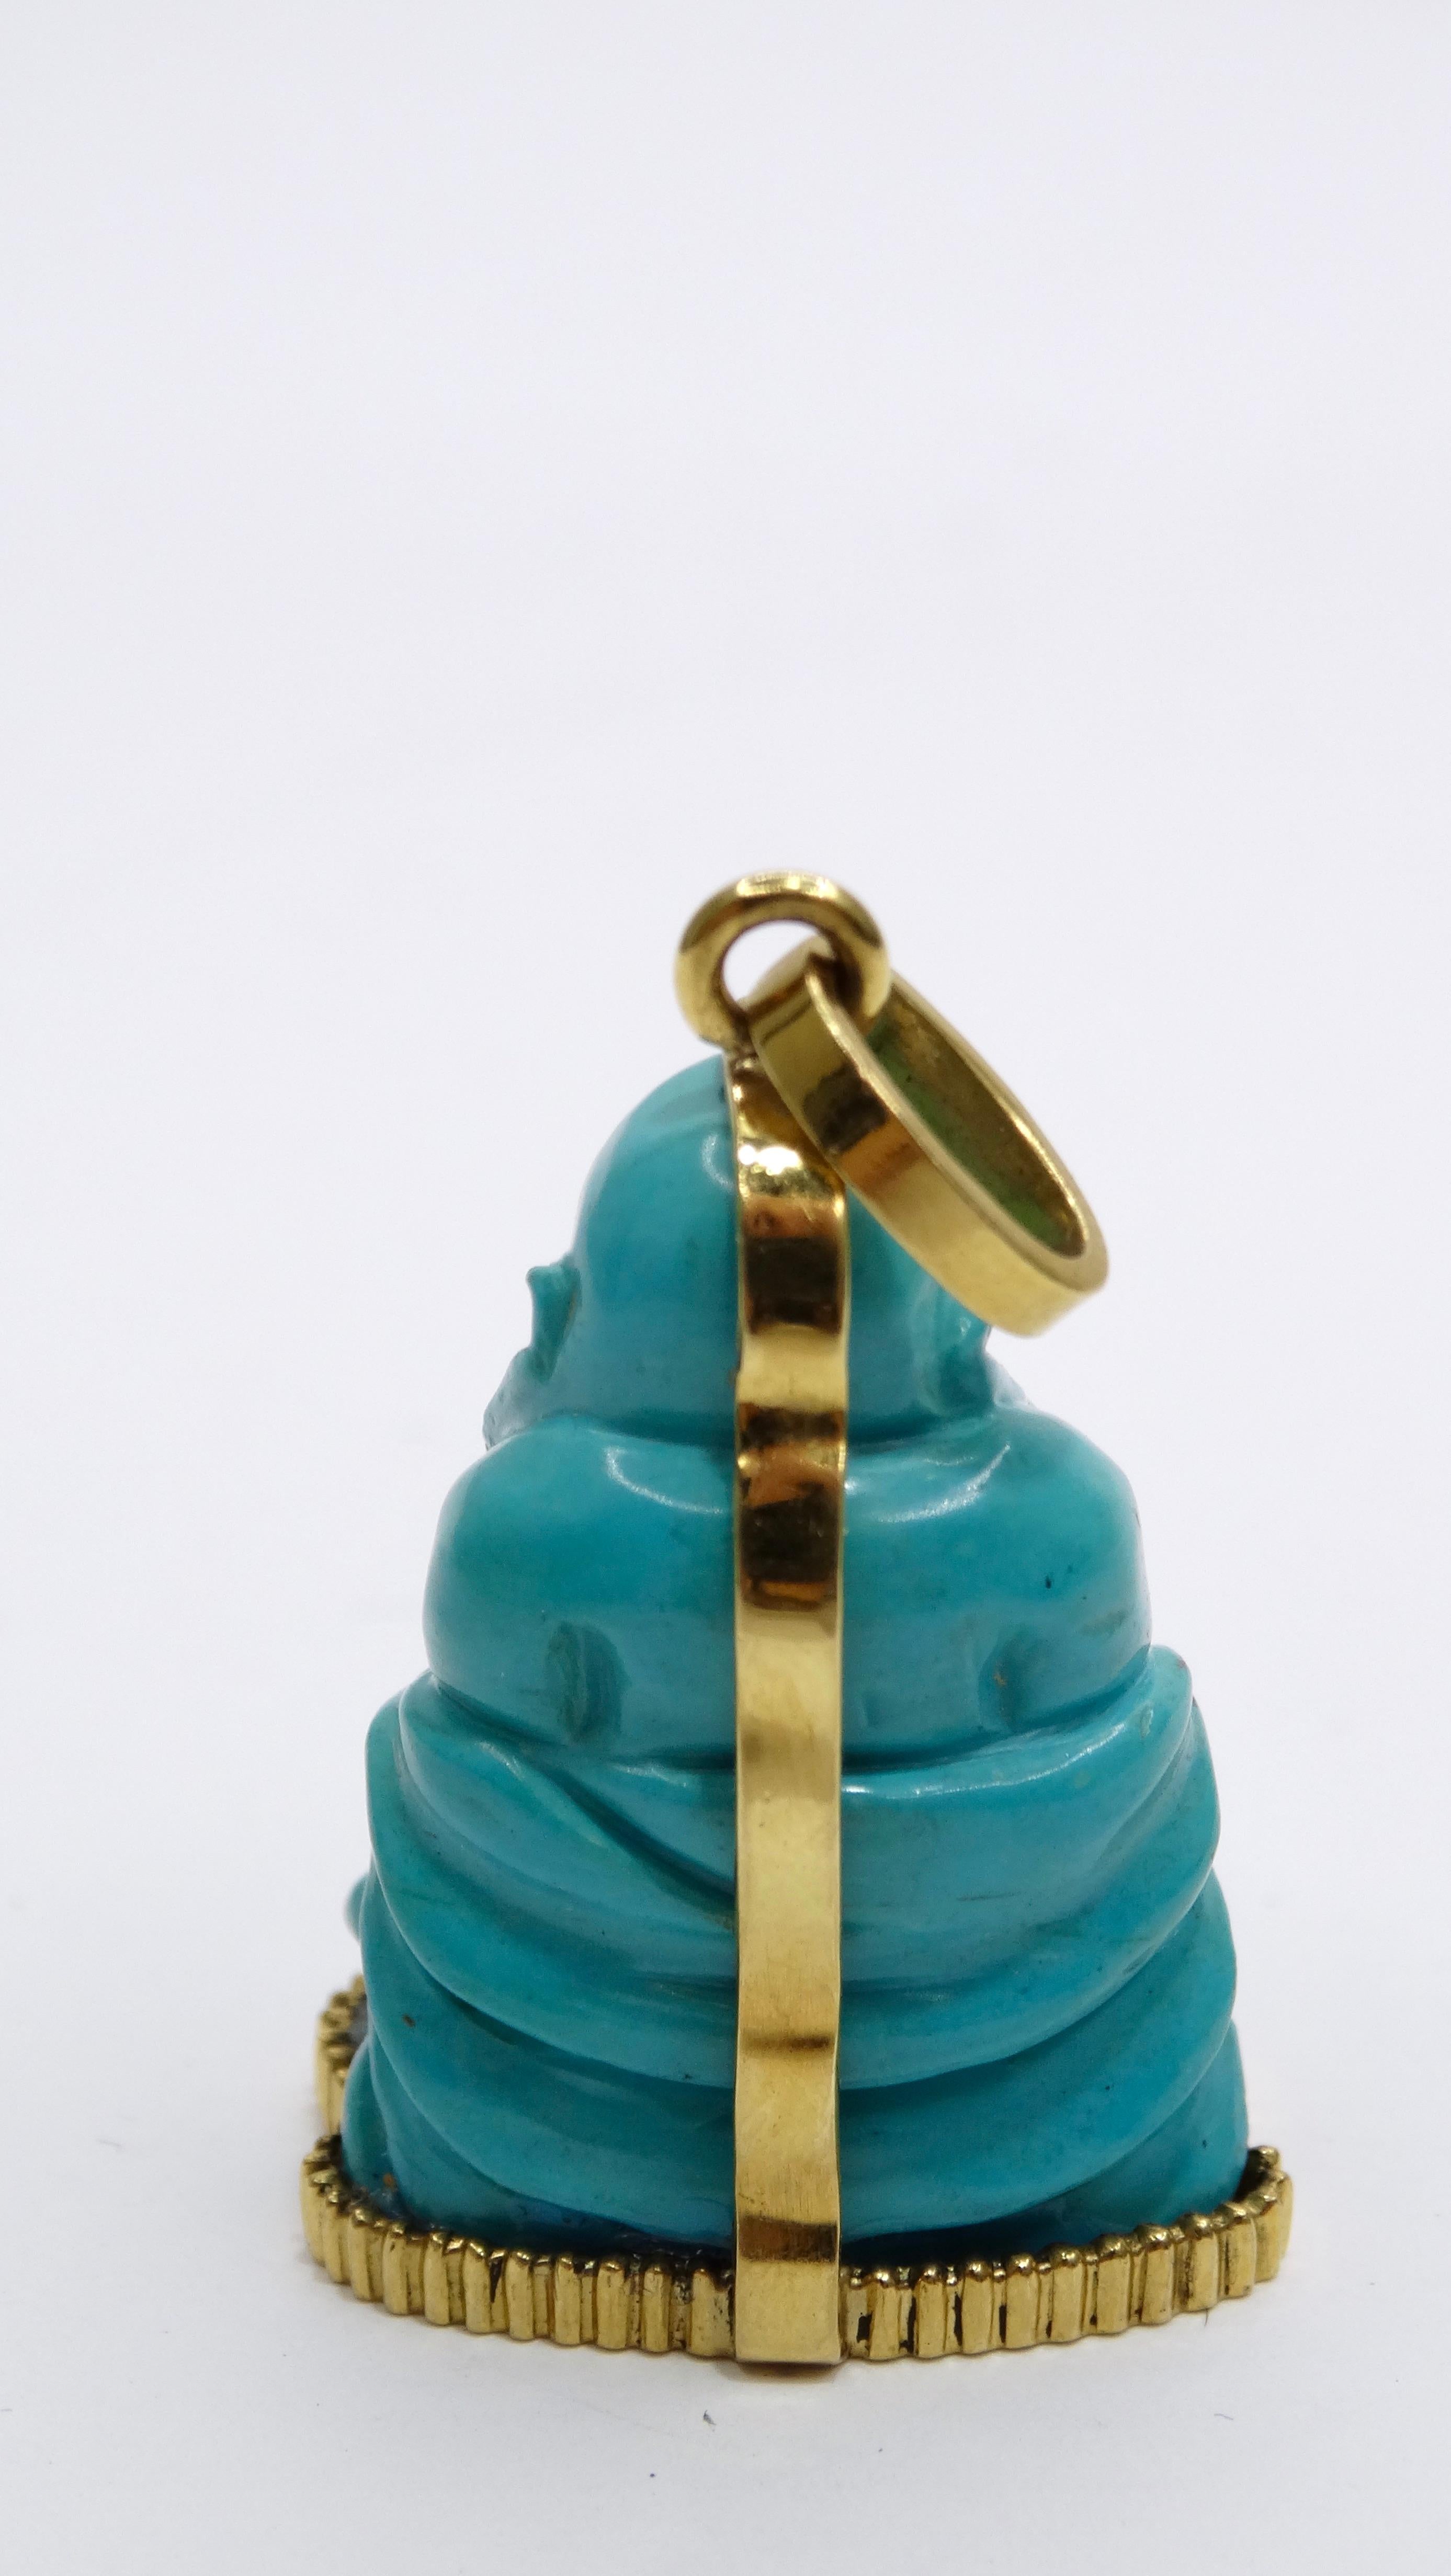 Sleeping Beauty Turquoise Budda Pendant in 18k Yellow Gold In Excellent Condition For Sale In Scottsdale, AZ